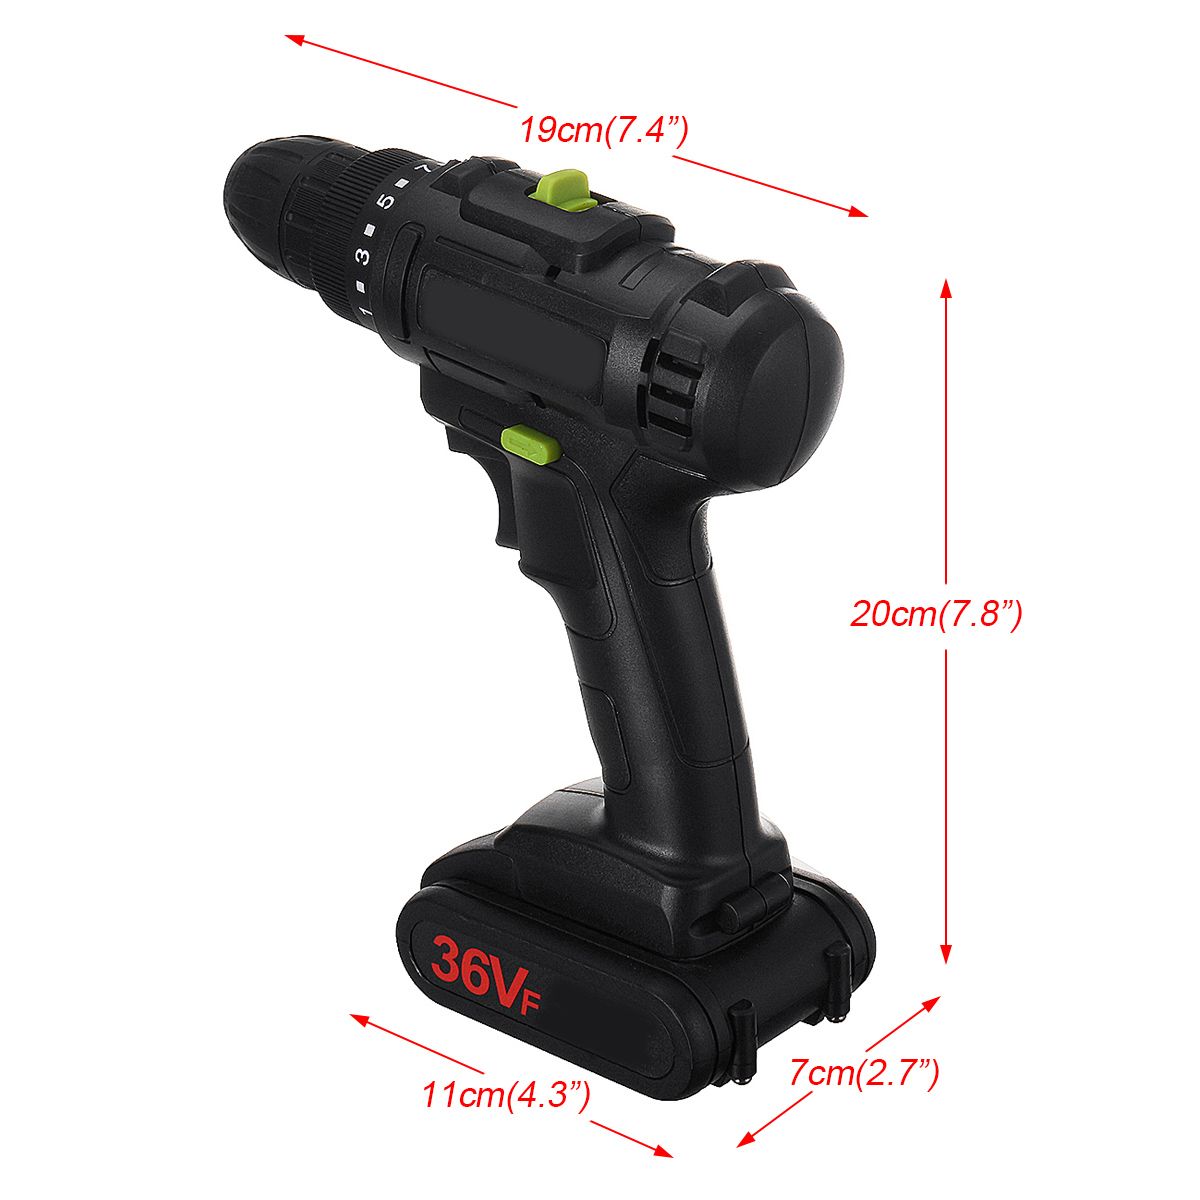 21V-1500mAH-LED-Light-Electric-Drill-Driver-Cordless-Rechargeable-Hand-Drills-2-Speed-Home-DIY-1574103